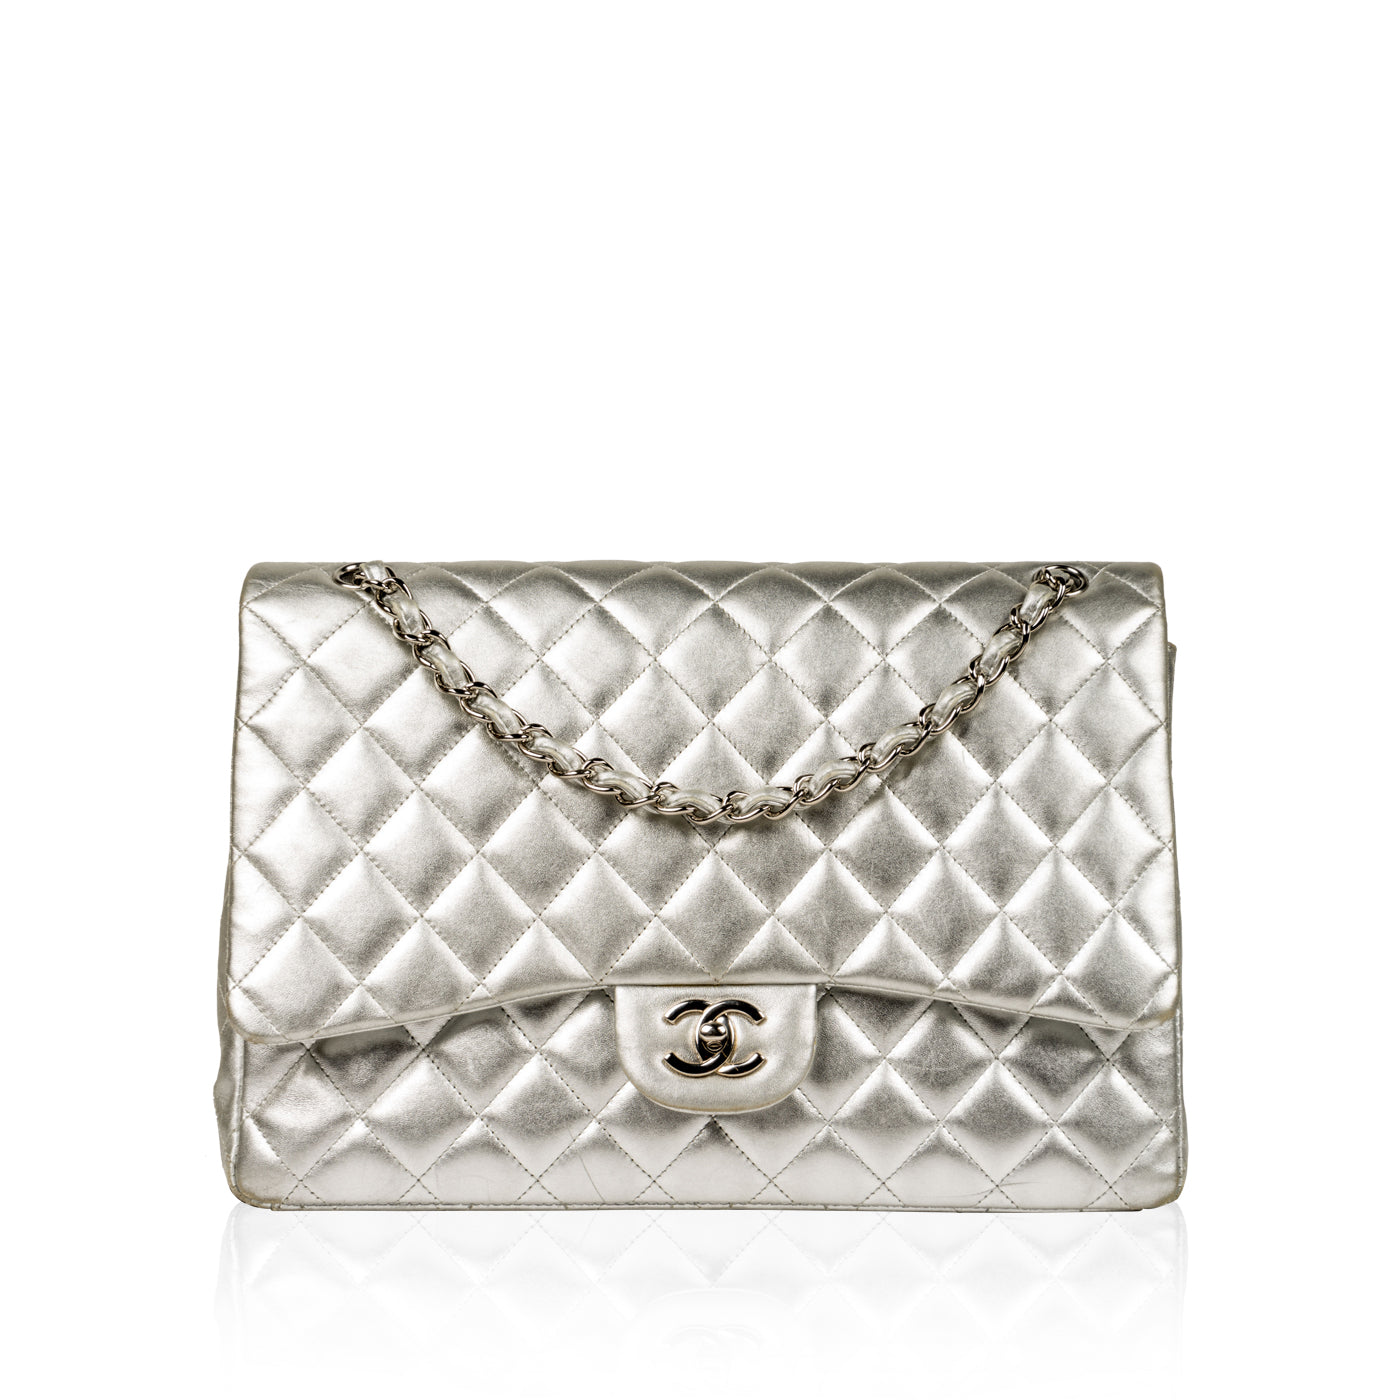 Vintage Chanel Silver Maxi Flap Review, Style of Sam